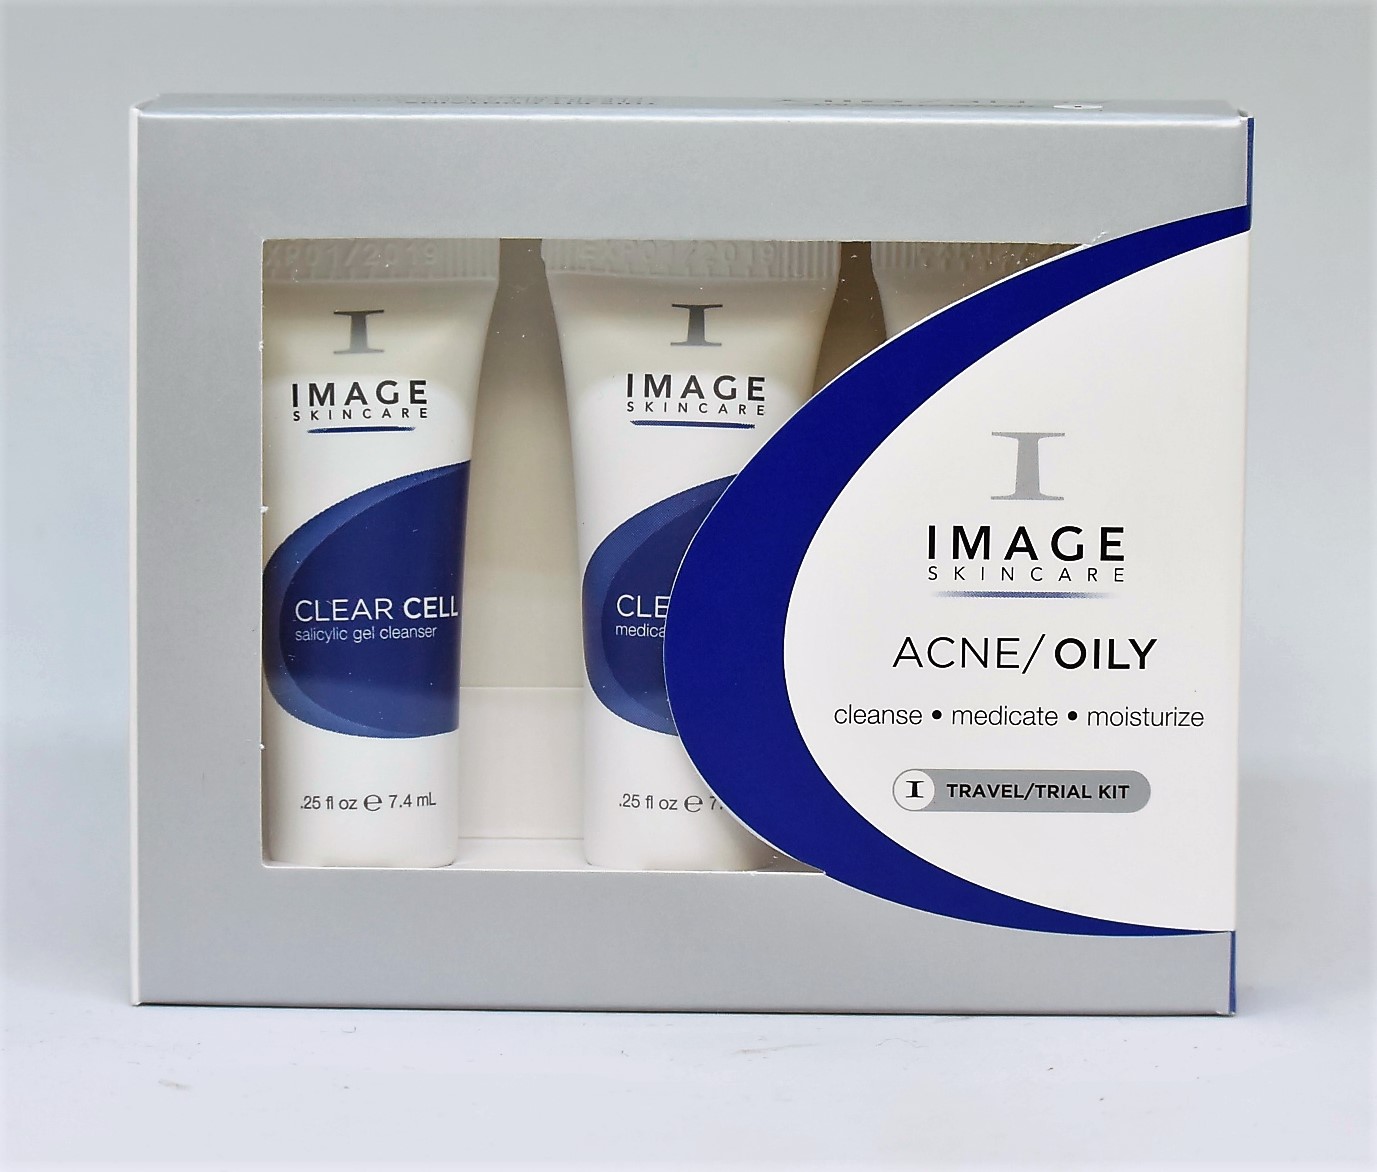 Image Skincare Acne / Oil Travel / Trial Kit - image 1 of 2